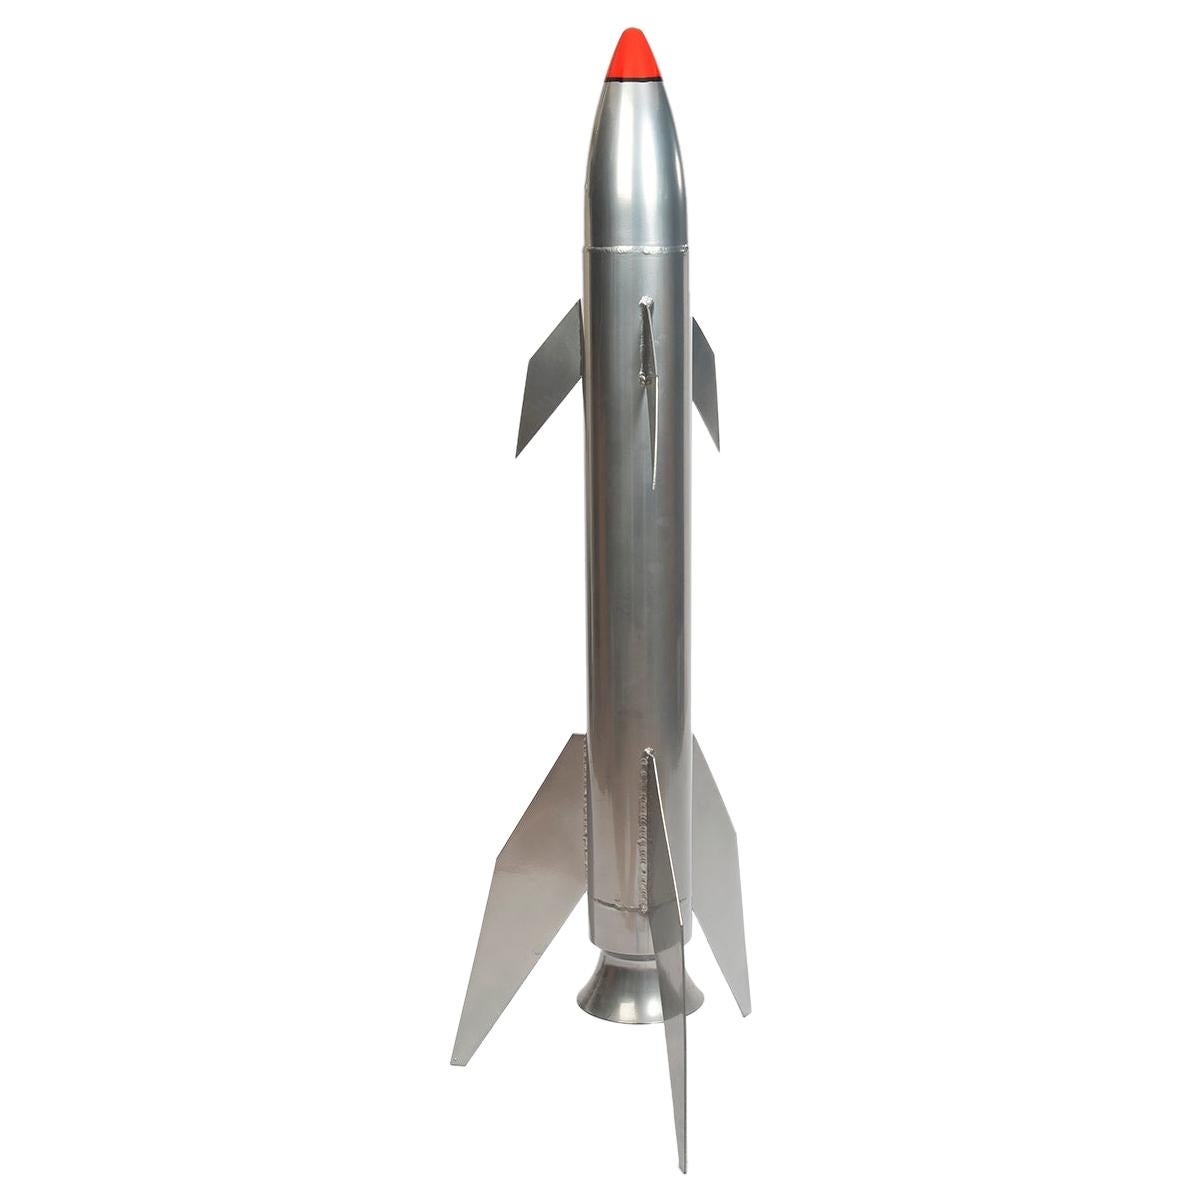 Aluminium Missile Display Feature/Collectable